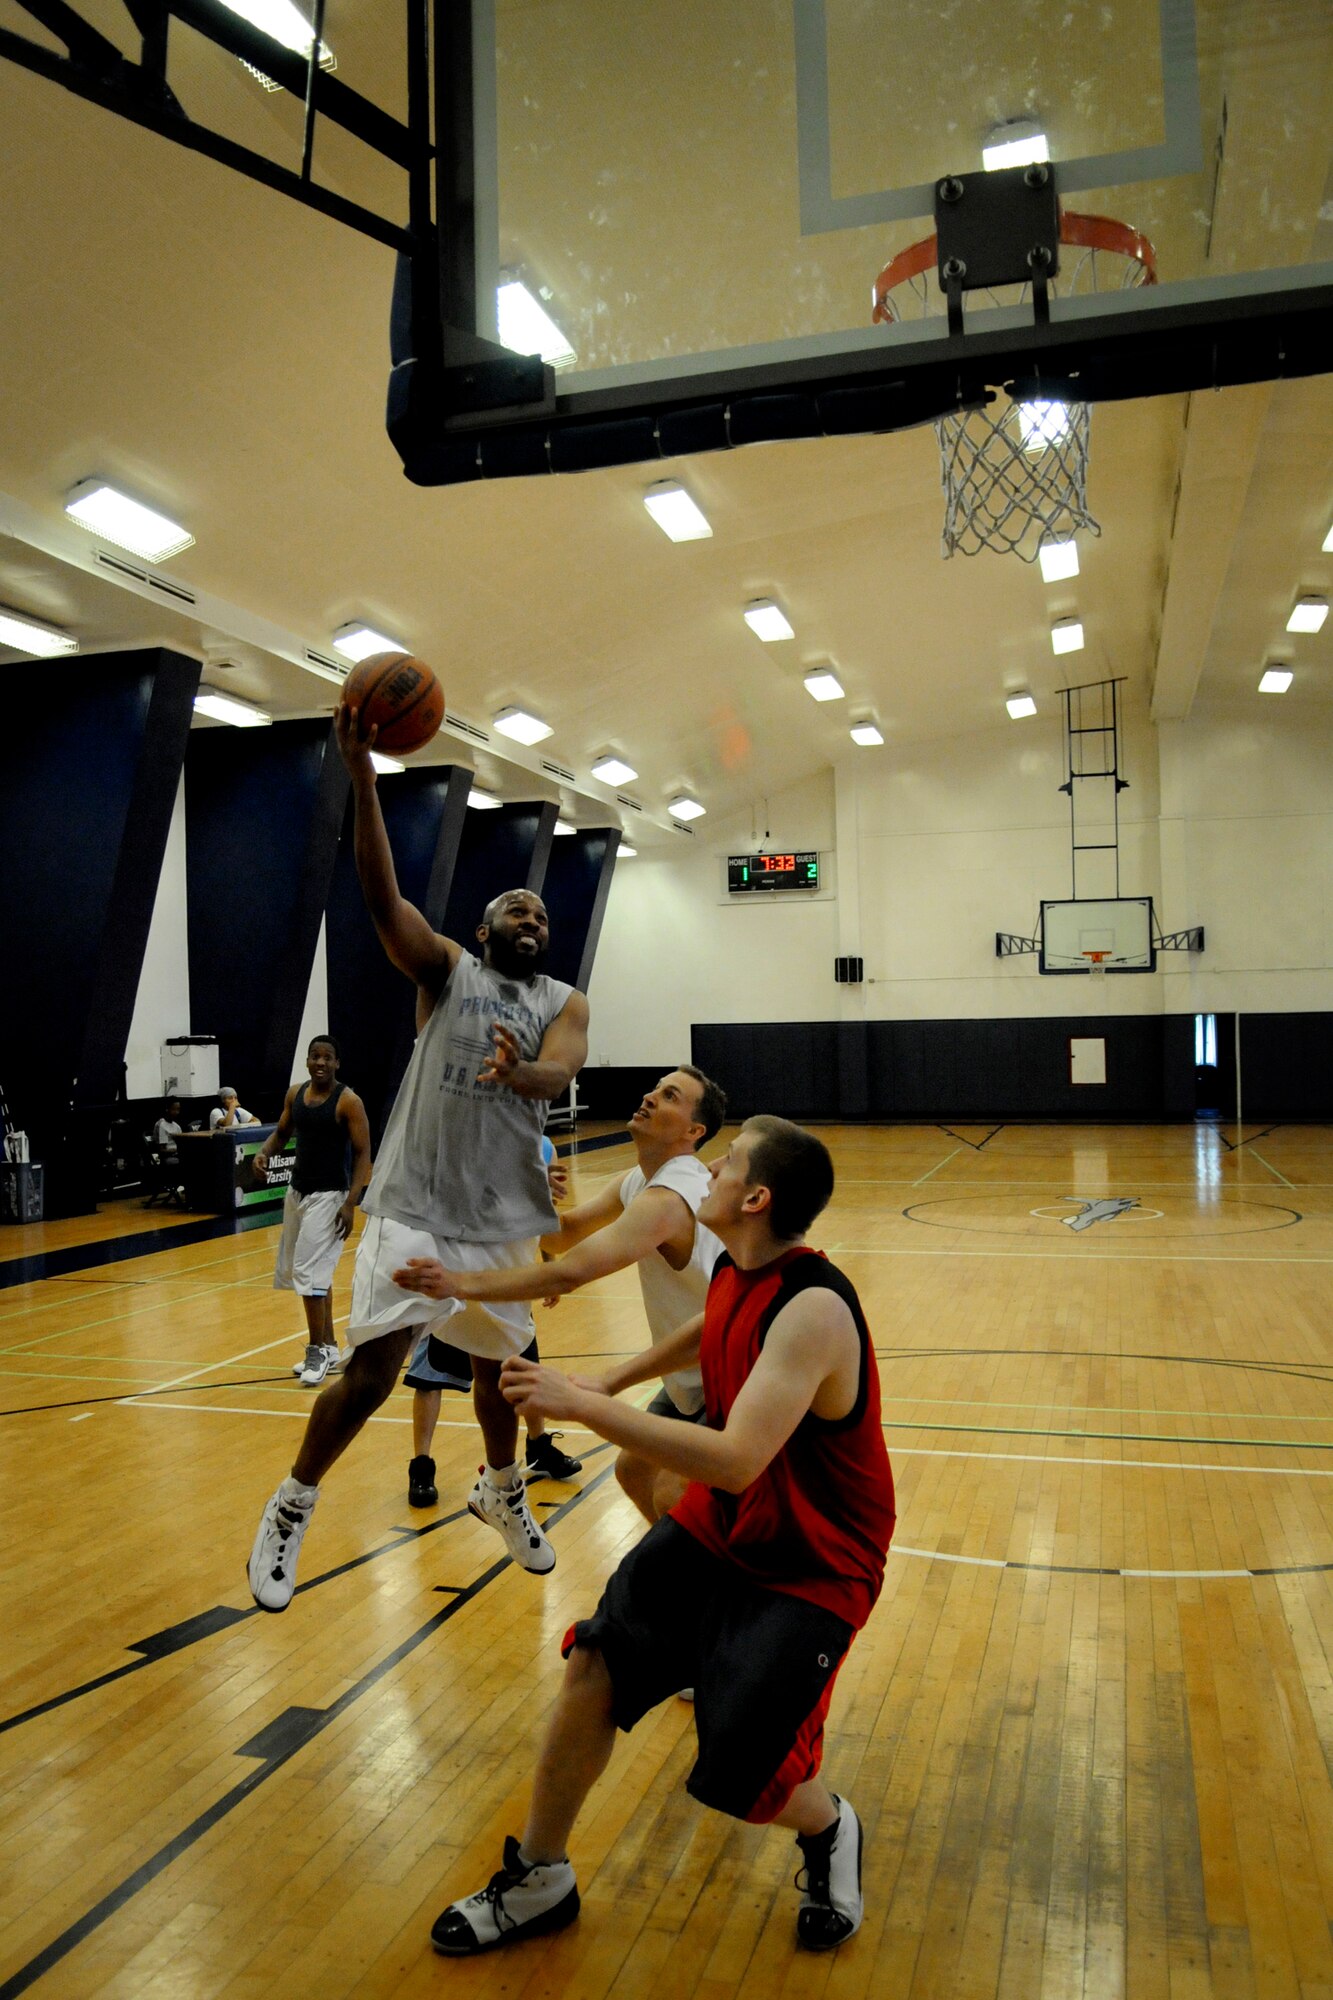 MISAWA AIR BASE, Japan -- Derreck Curtis drives past Douglas Warner for a lay-up during a 3-on-3 basketball tournament at the Potter Fitness Center May 27, 2009. Curtis' team finished the tournament in first place. (U.S. Air Force photo by Senior Airman Jamal D. Sutter)